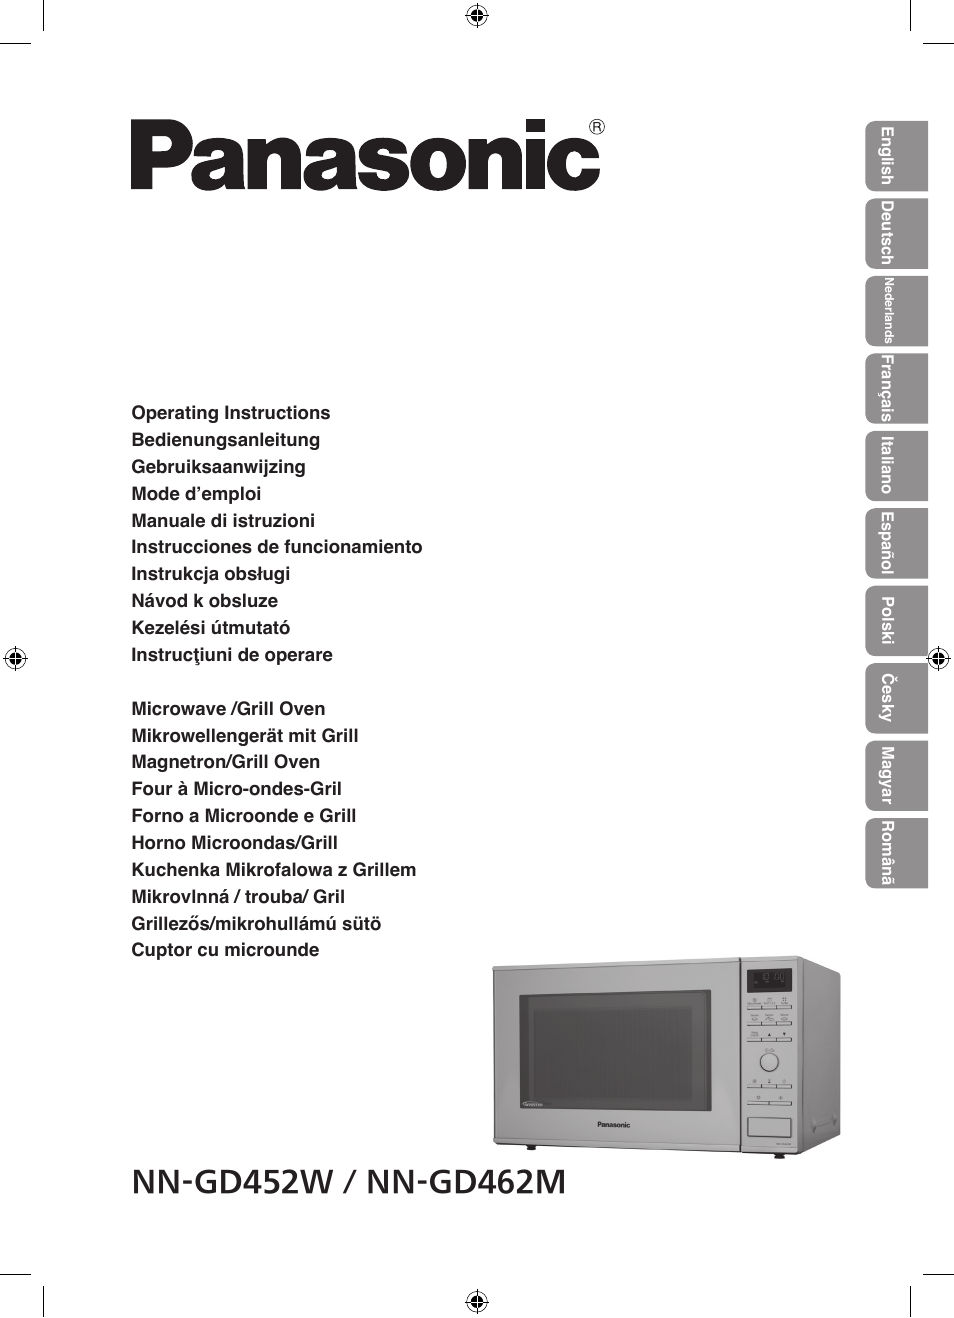 Panasonic NNGD462M User Manual | 34 pages | Also for: NNGD452W